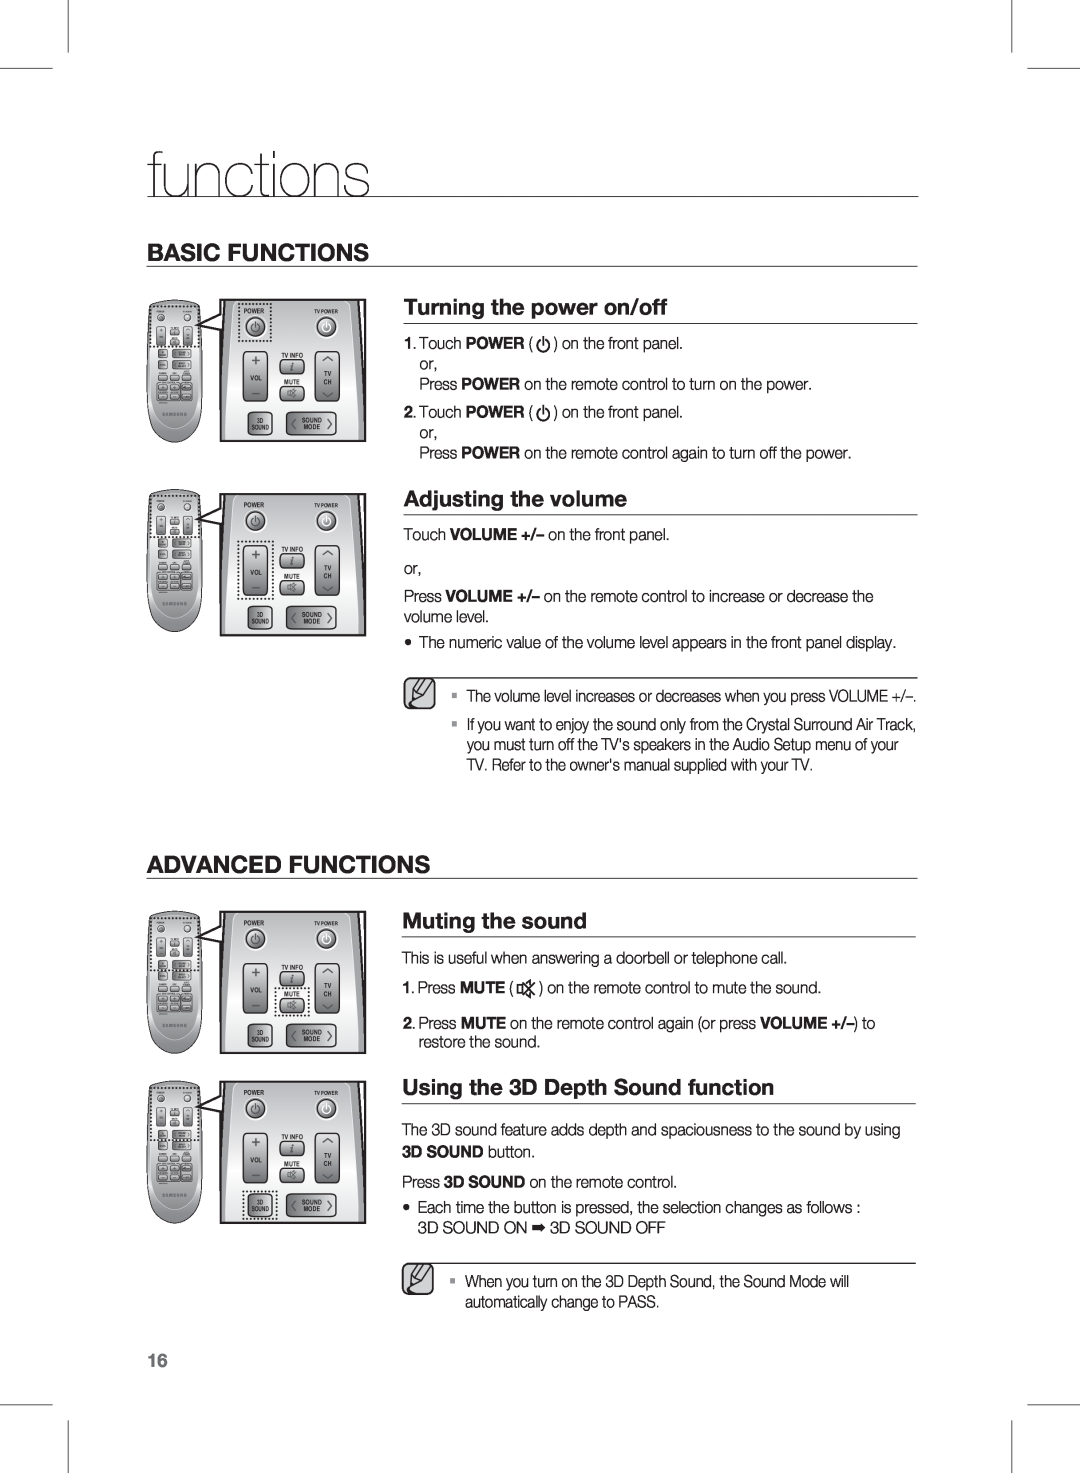 Samsung HW-D450 basic functions, advanced functions, Turning the power on/off, Adjusting the volume, Muting the sound 